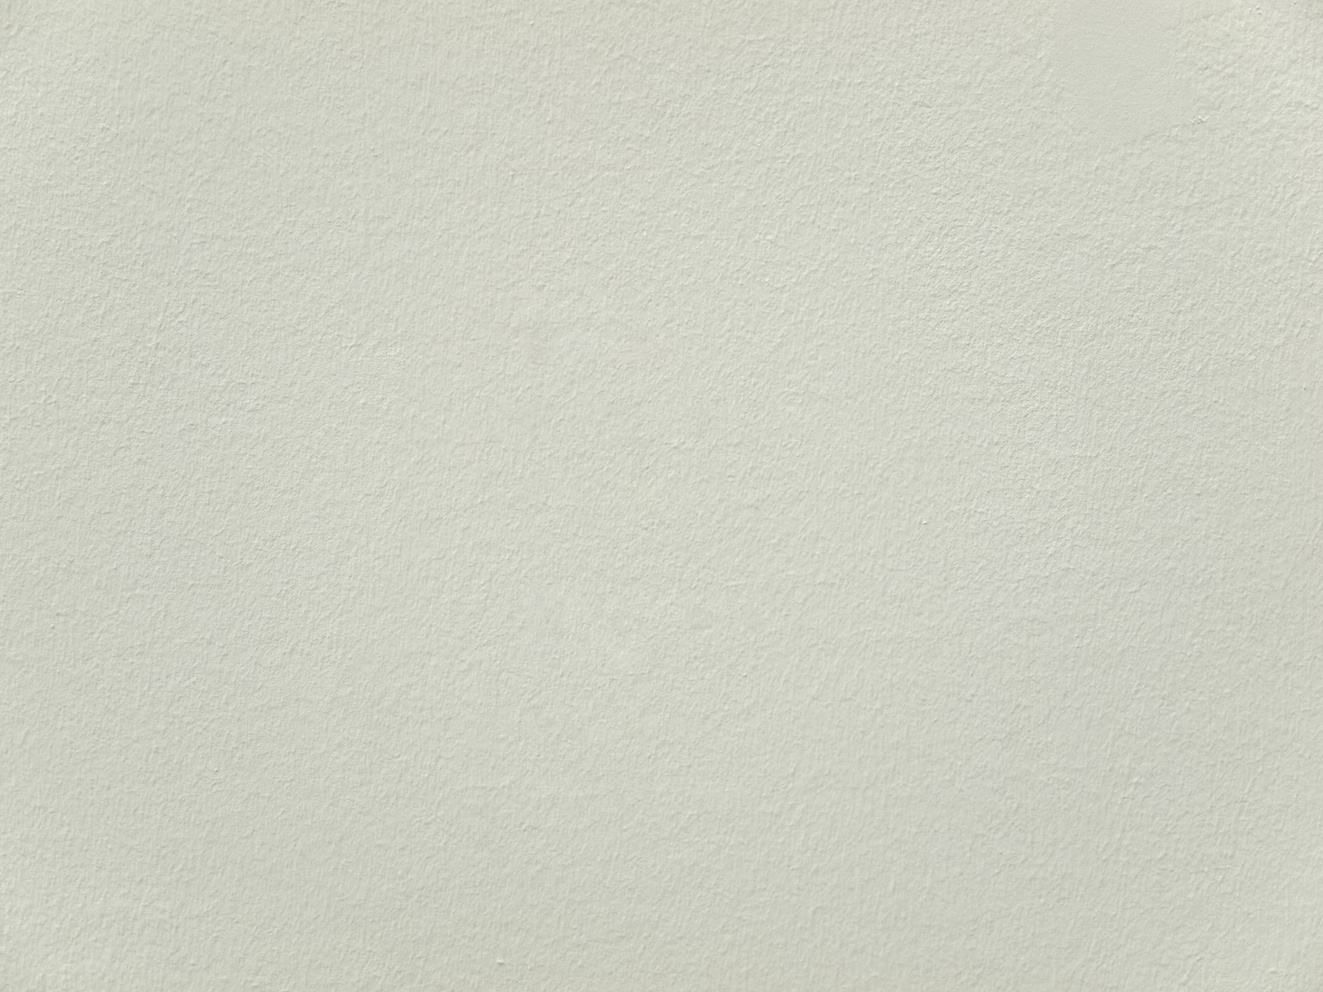 Off White Plaster Wall Background